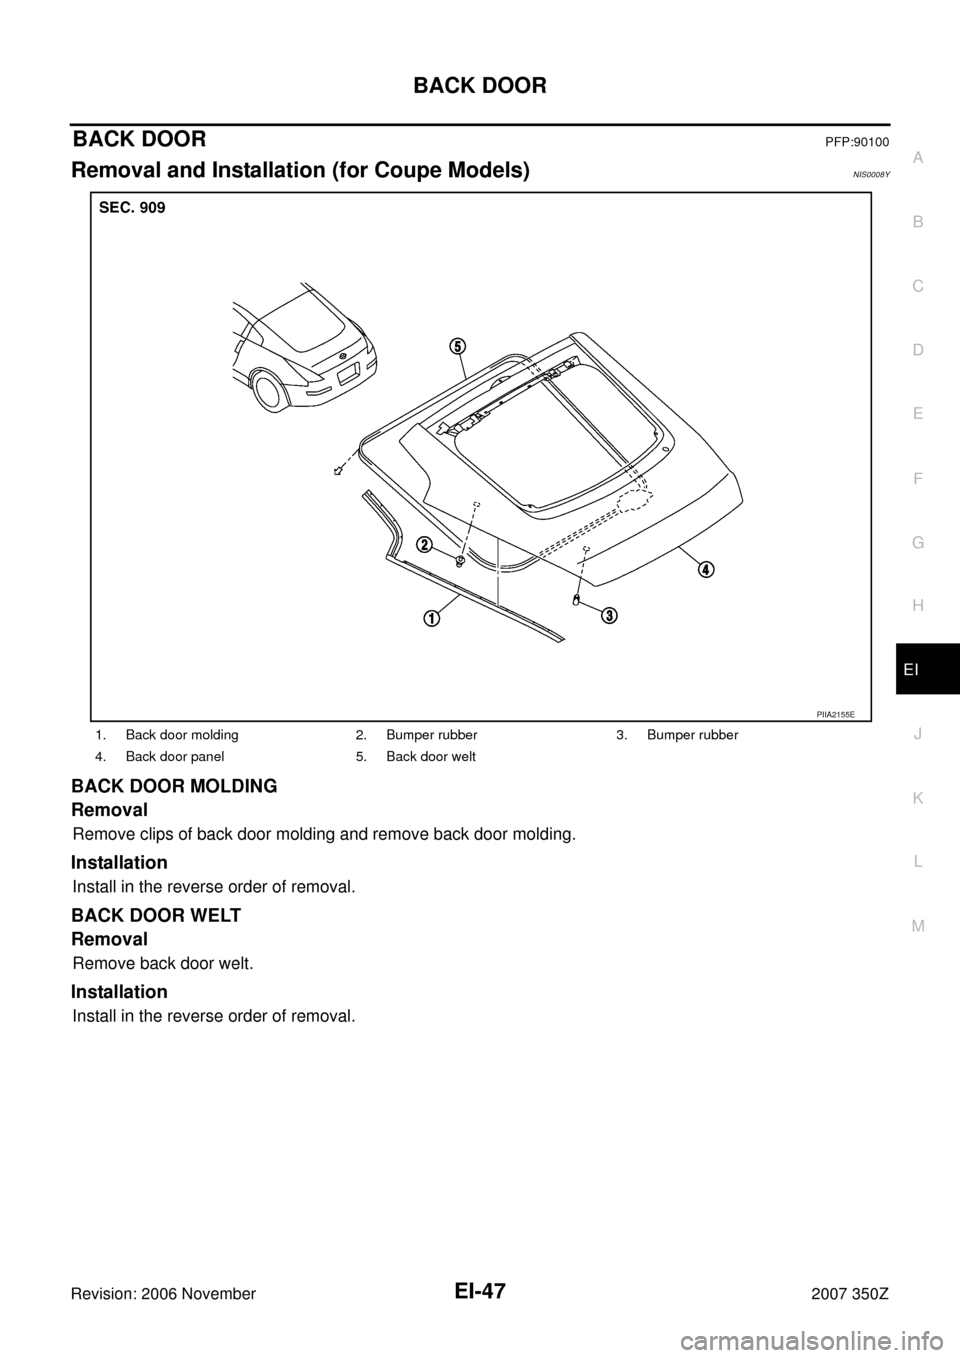 NISSAN 350Z 2007 Z33 Exterior And Interior Service Manual BACK DOOR
EI-47
C
D
E
F
G
H
J
K
L
MA
B
EI
Revision: 2006 November2007 350Z
BACK DOORPFP:90100
Removal and Installation (for Coupe Models)NIS0008Y
BACK DOOR MOLDING
Removal
Remove clips of back door mo